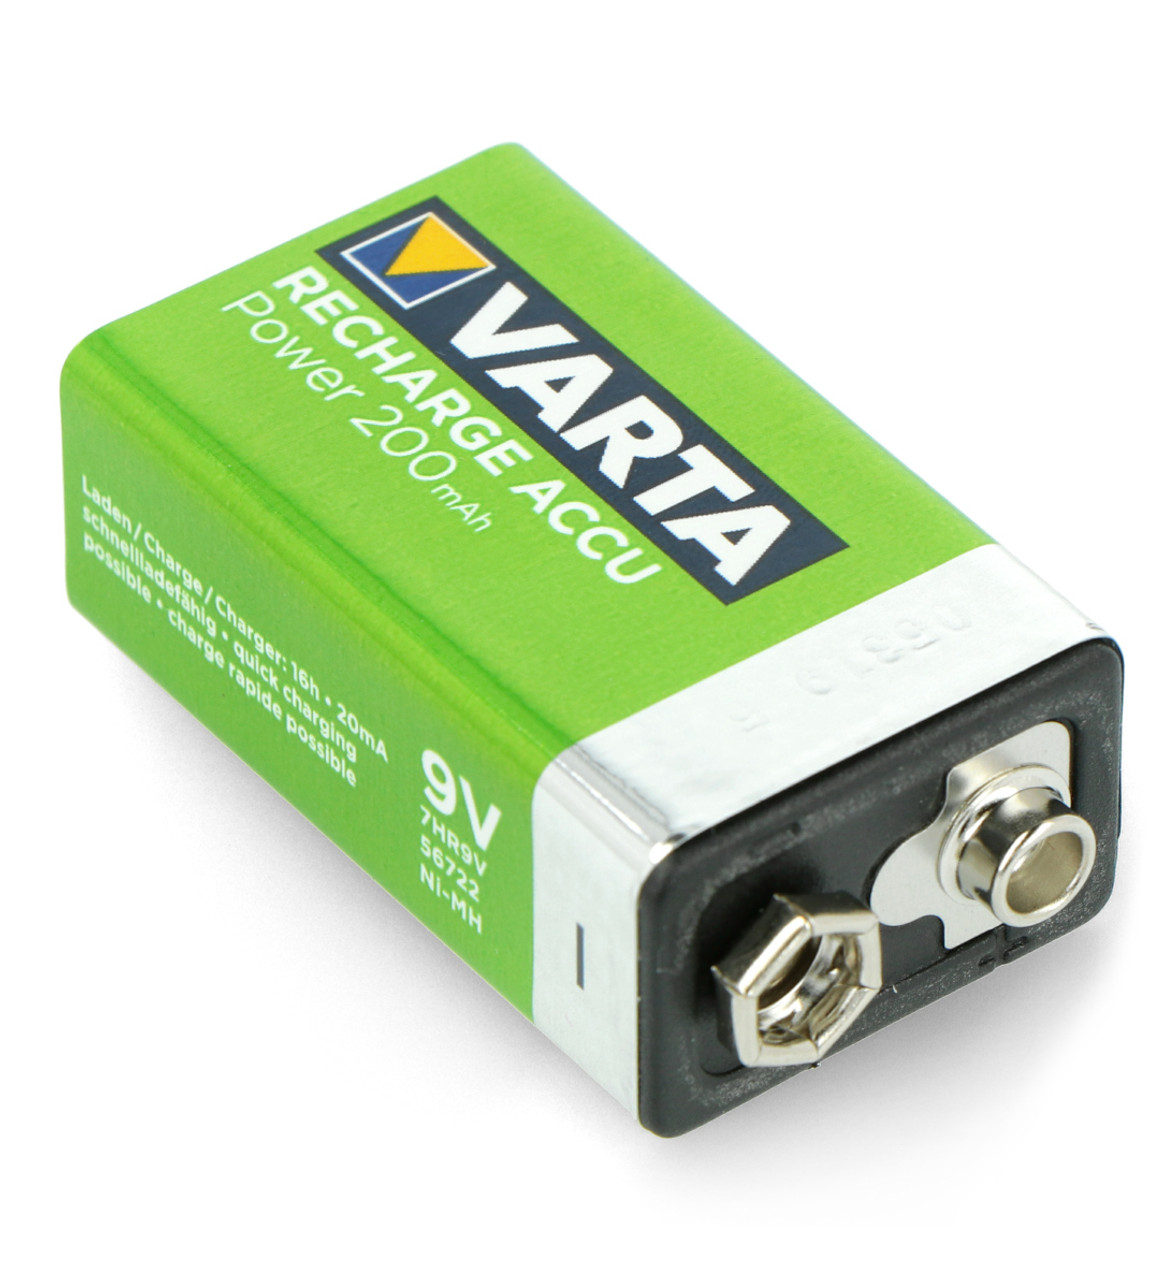 Varta P7/8H - 5622101501 Battery 8.4V Rechargeable (Replacement)